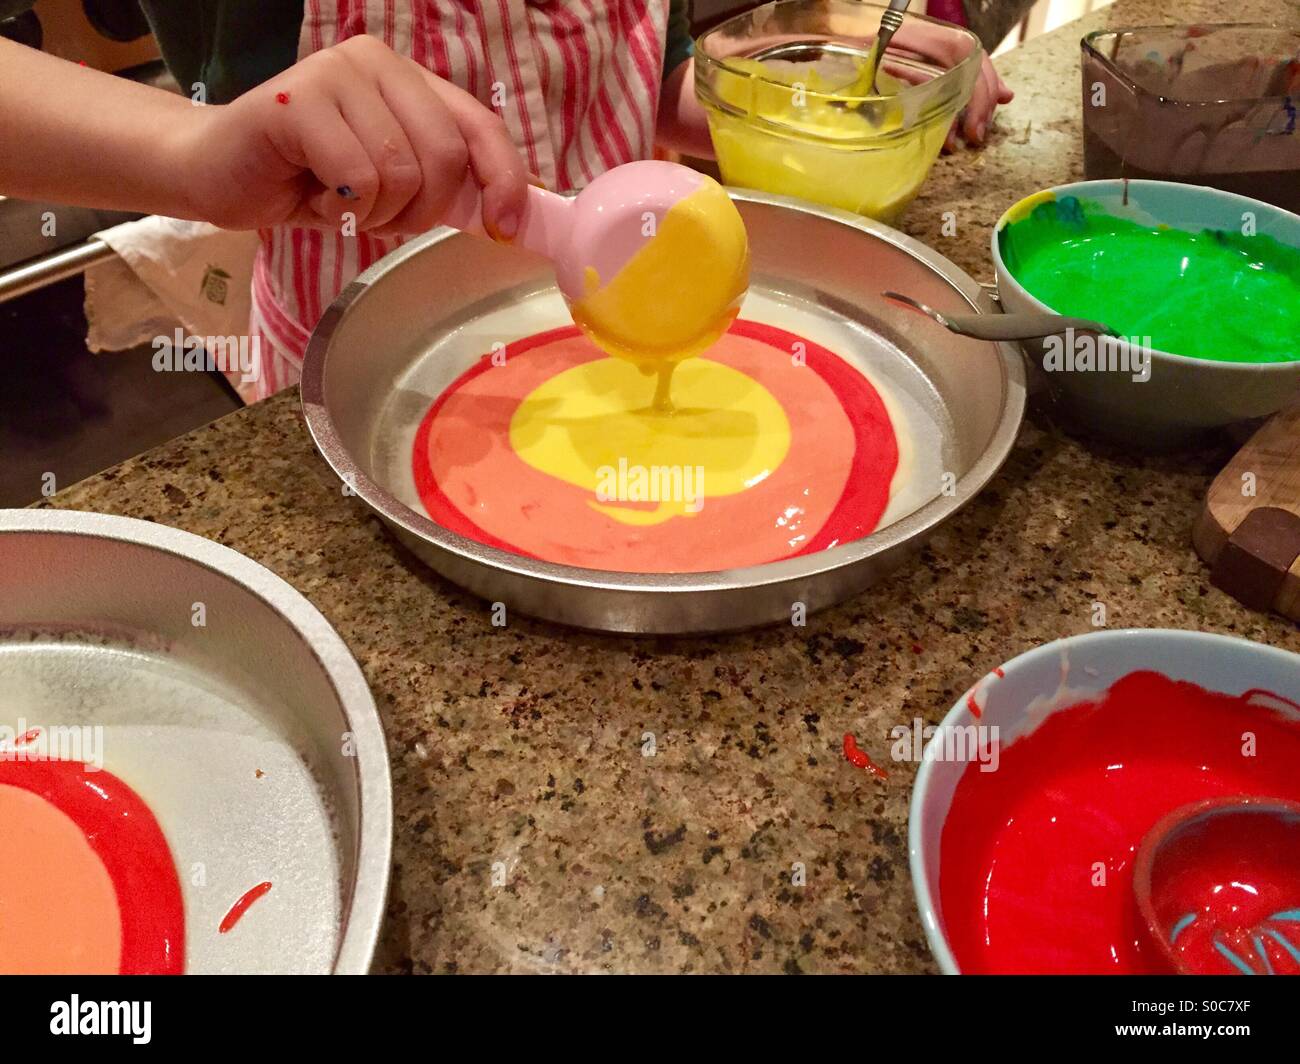 A child pours colorful yellow cake batter into a cake pan on a messy kitchen counter. Stock Photo